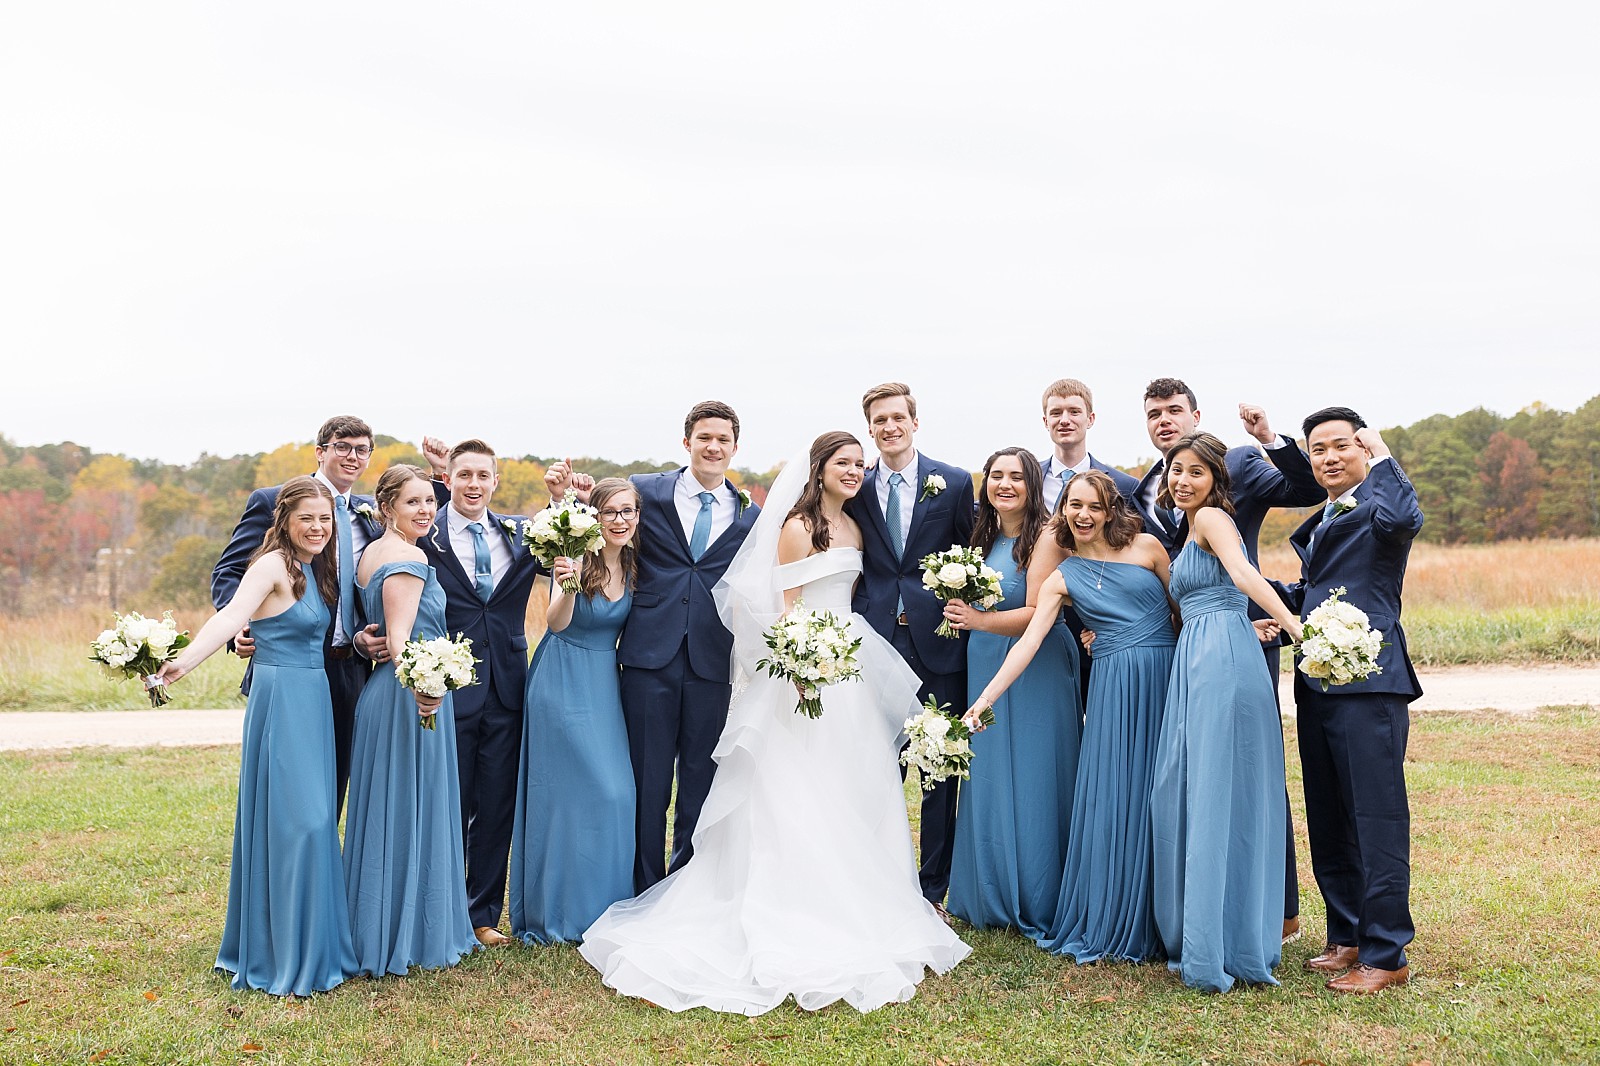 Wedding party celebrating | Fall Wedding at The Meadows in Raleigh | Raleigh NC Wedding Photographer